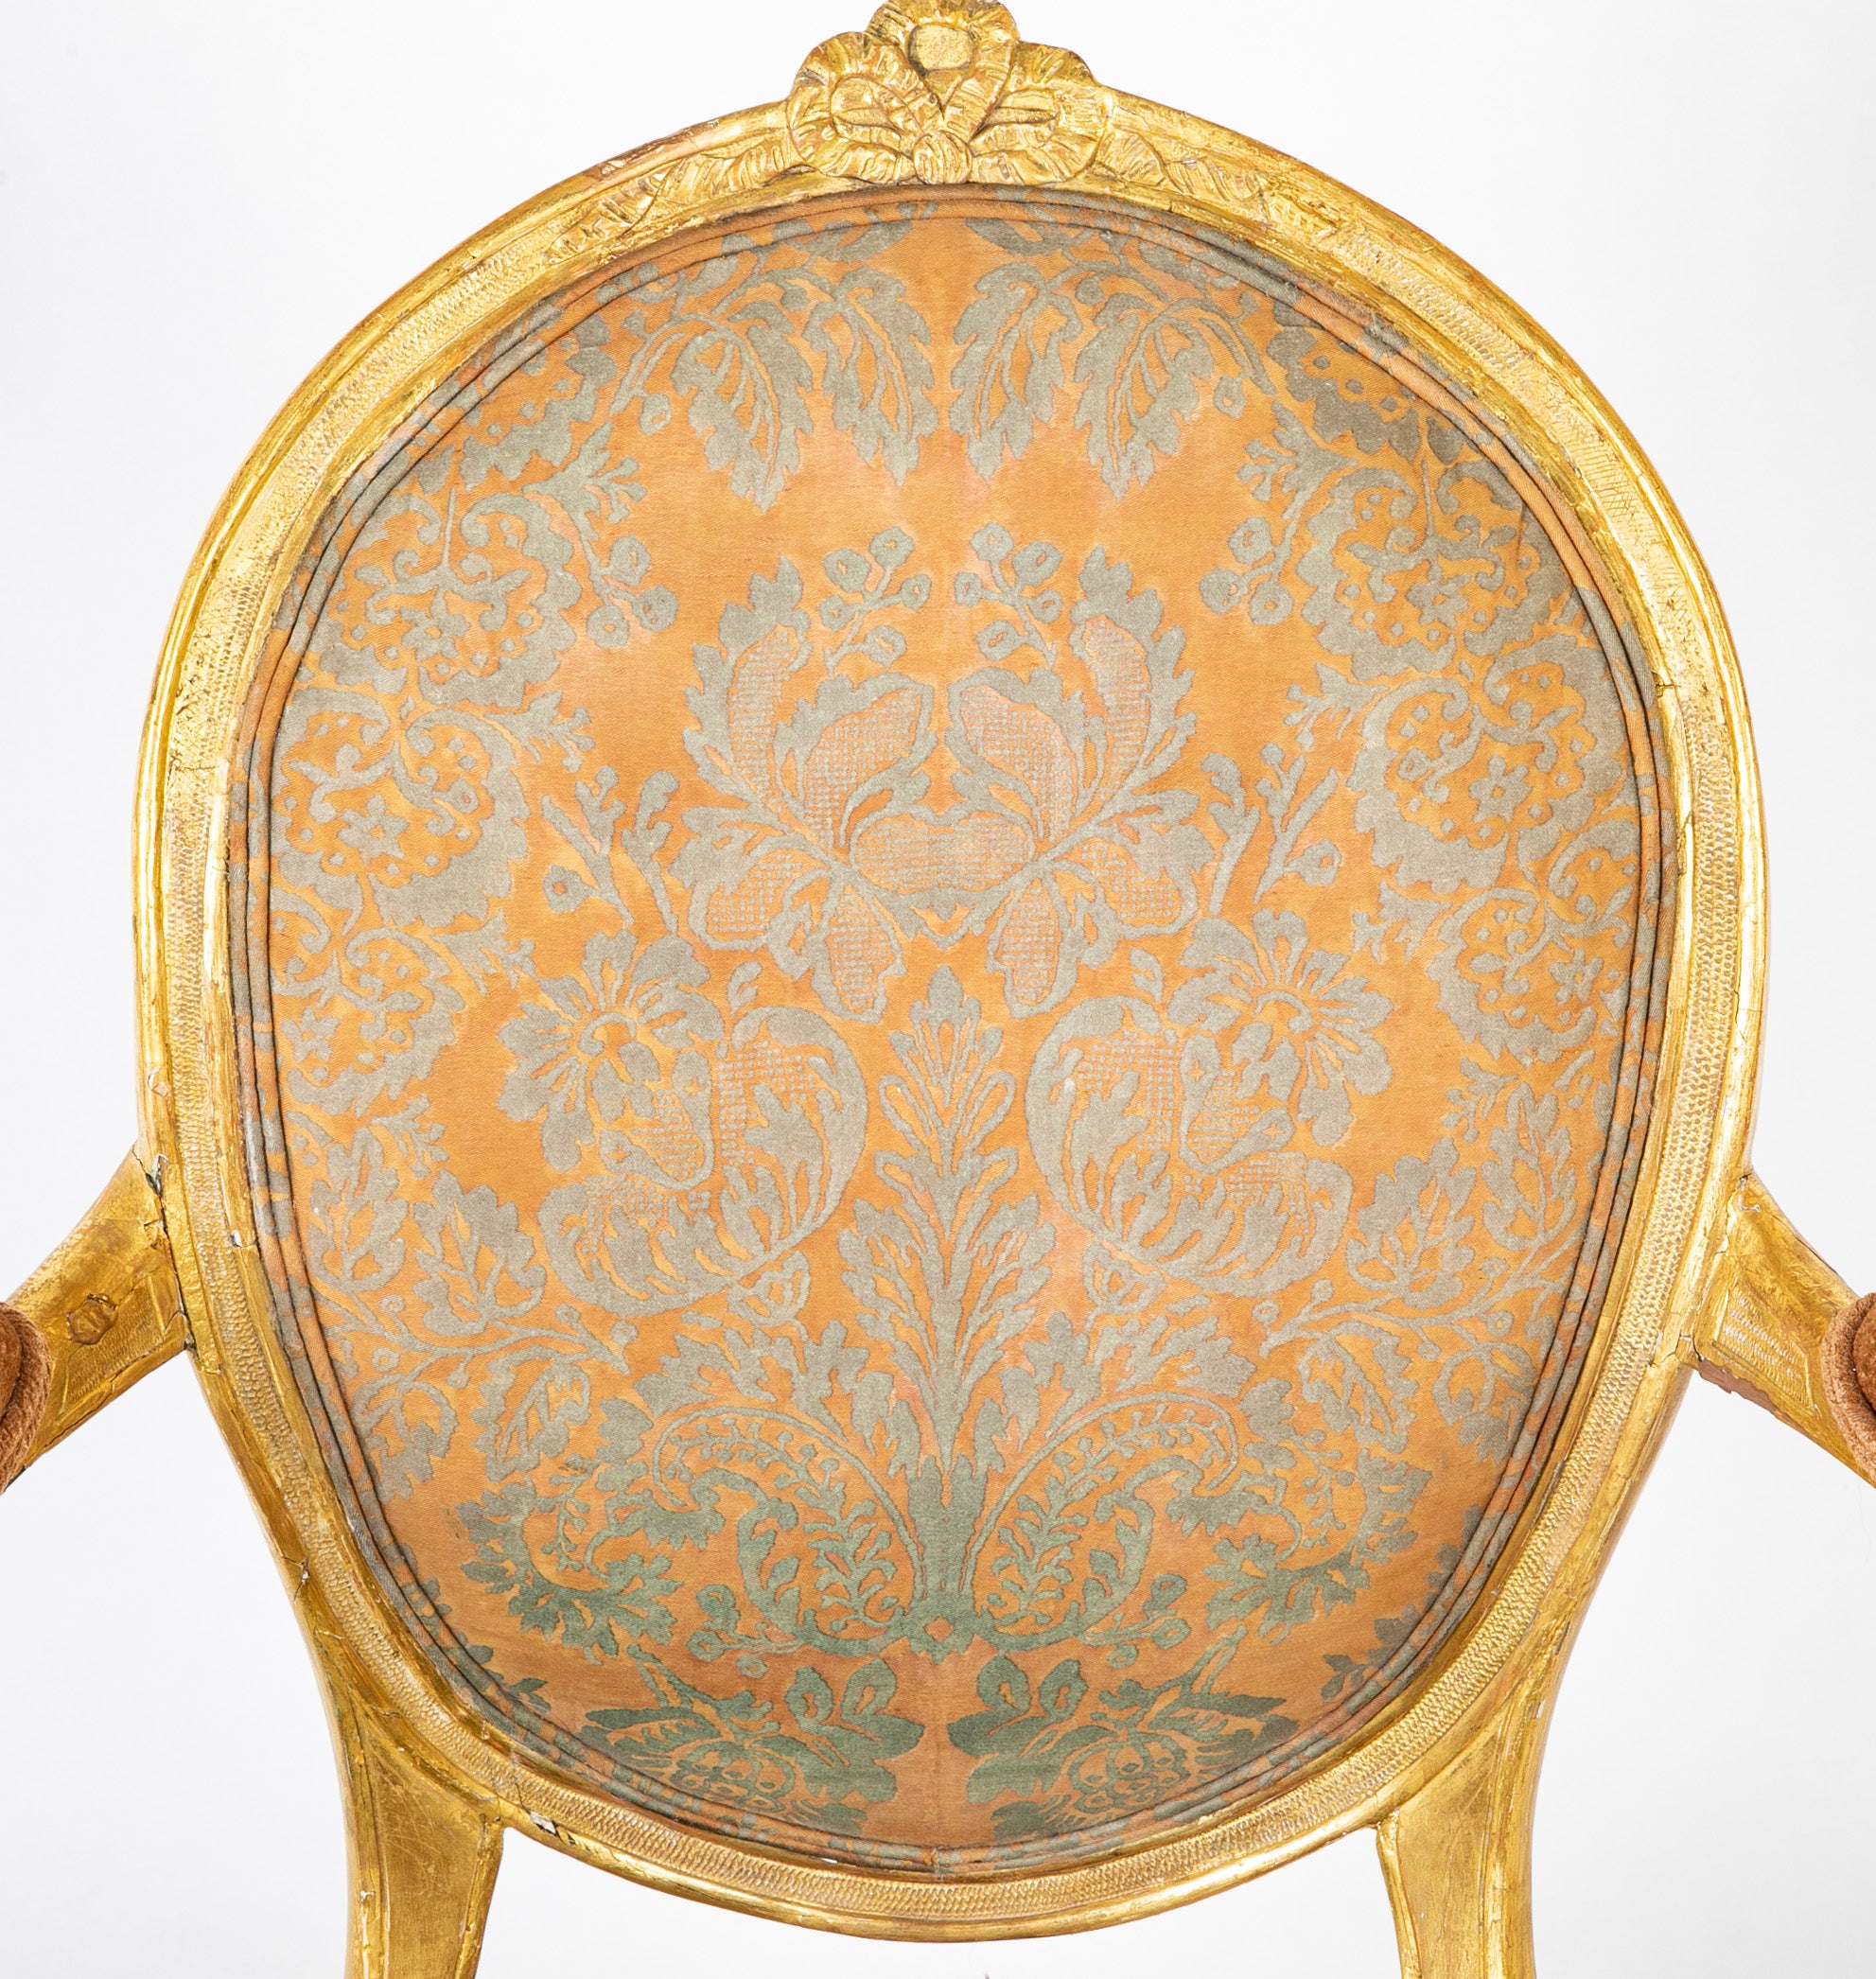 A Pair of George III Period Giltwood Oval Back "Elbow" Chairs